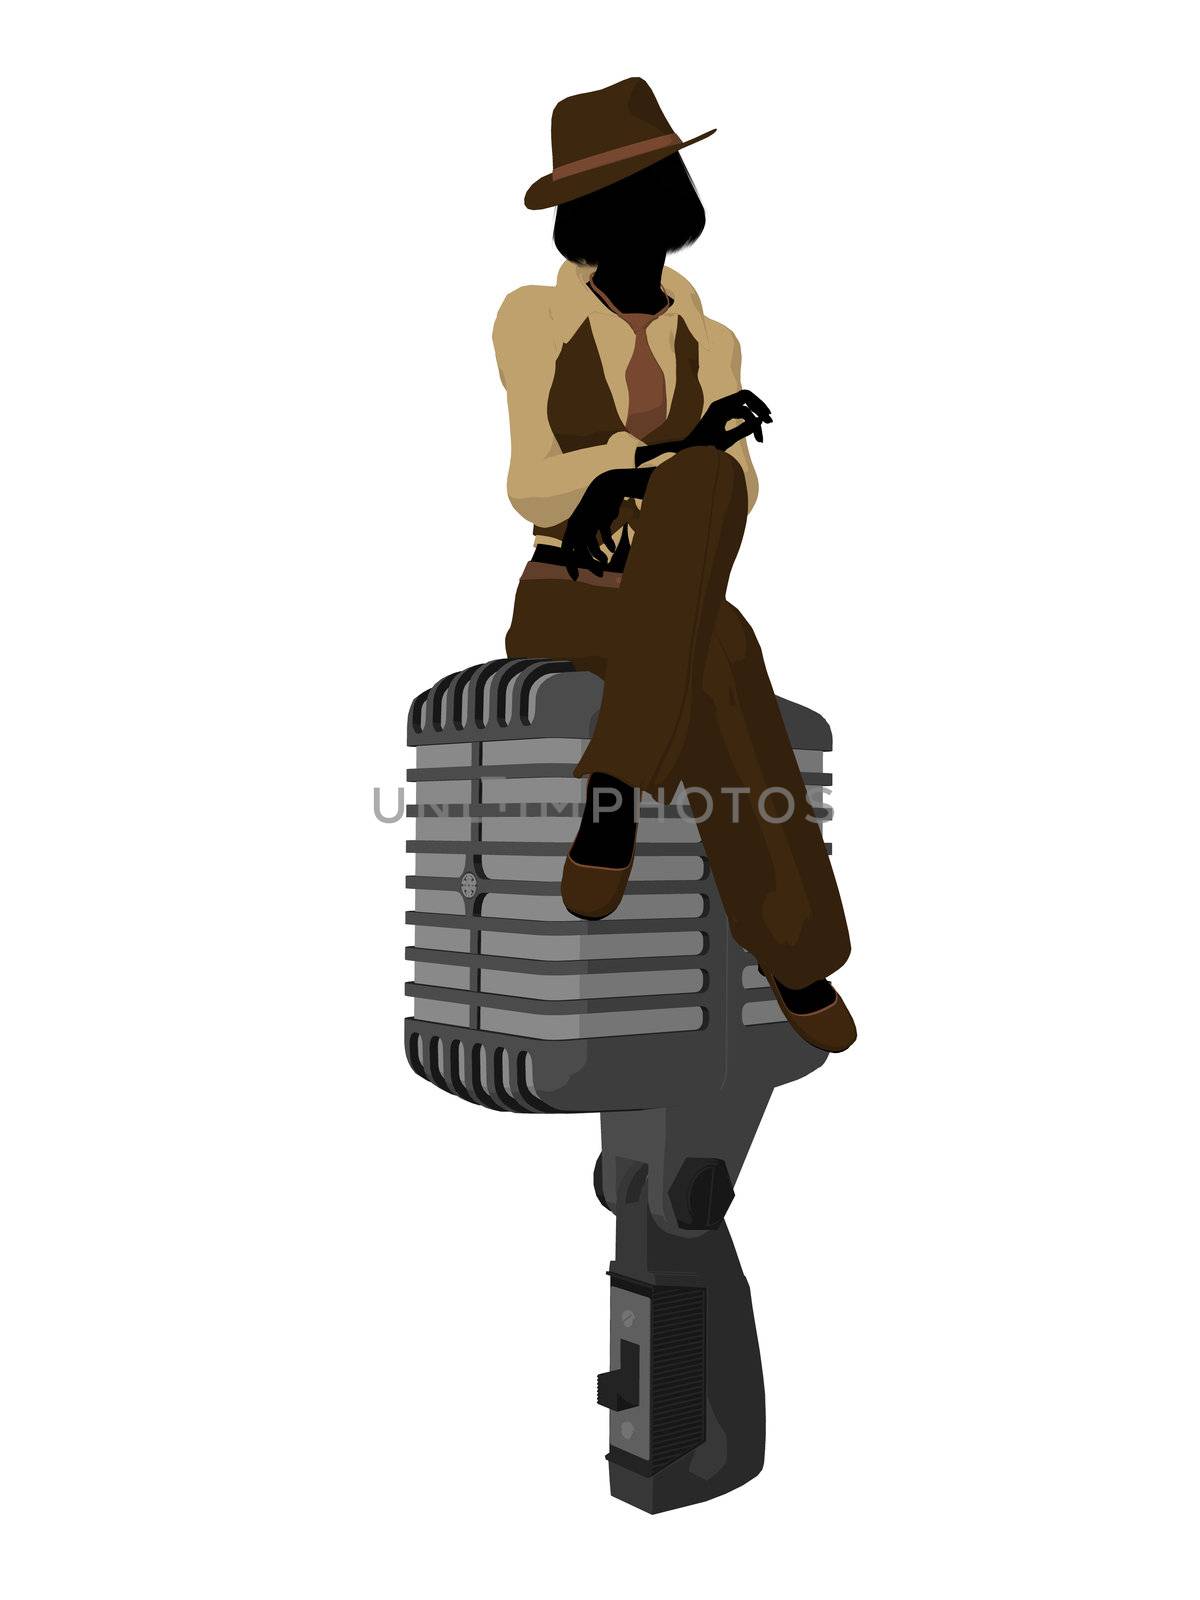 Female jazz musician on a microphone on a white background